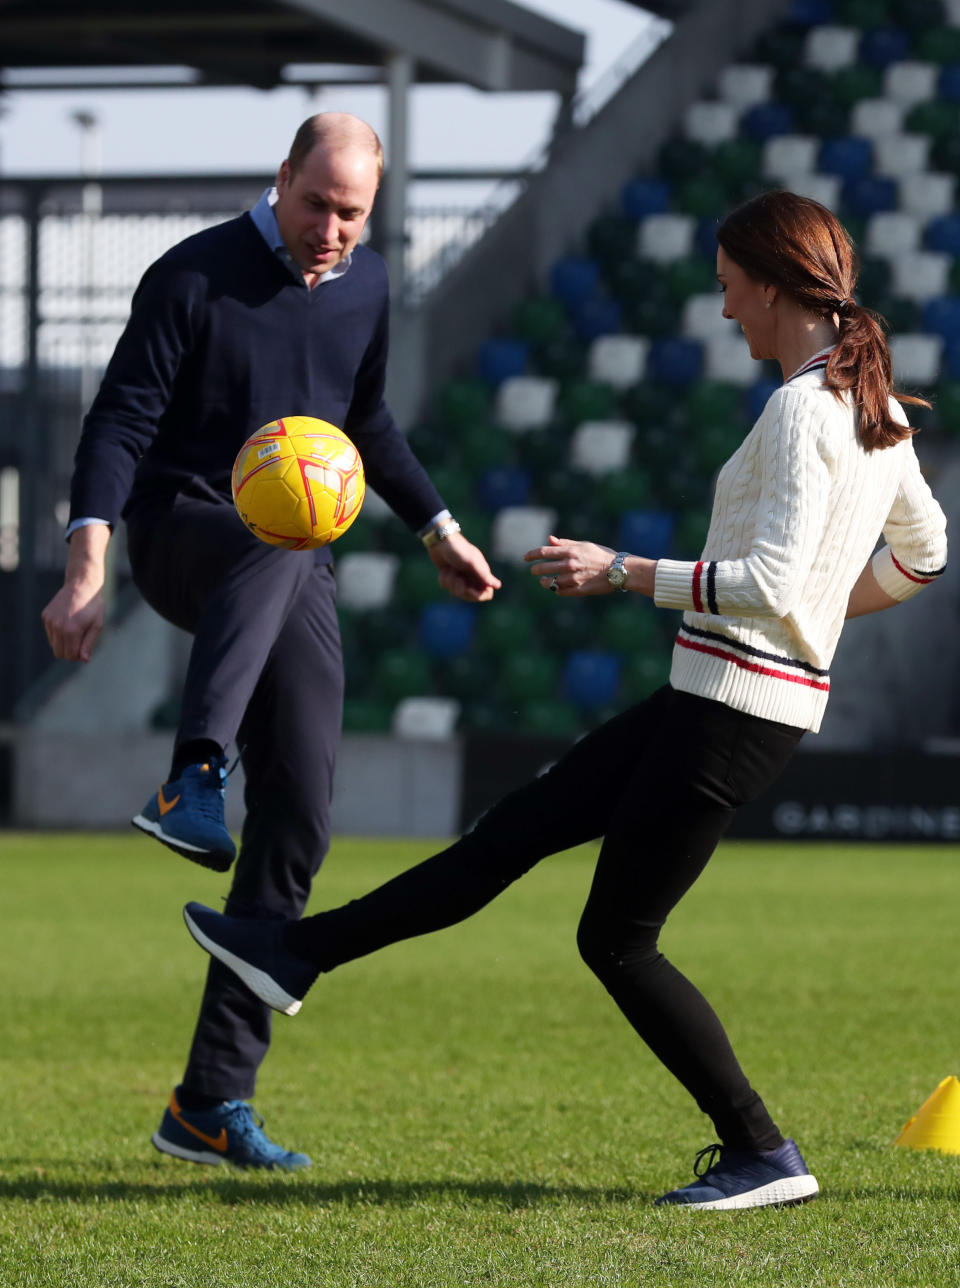 The Duke & Duchess of Cambridge visit the National Stadium Belfast, home of the Irish Football Association on February 27, 2019. They met groups and representatives from the Female Football Leaders, the Goals Programme, Education Programme, Stay Onside, PSNI, DoJ and Probation Service and members of Powerchair. (Photo: Kelvin Boyes/Press Eye/Getty Images)